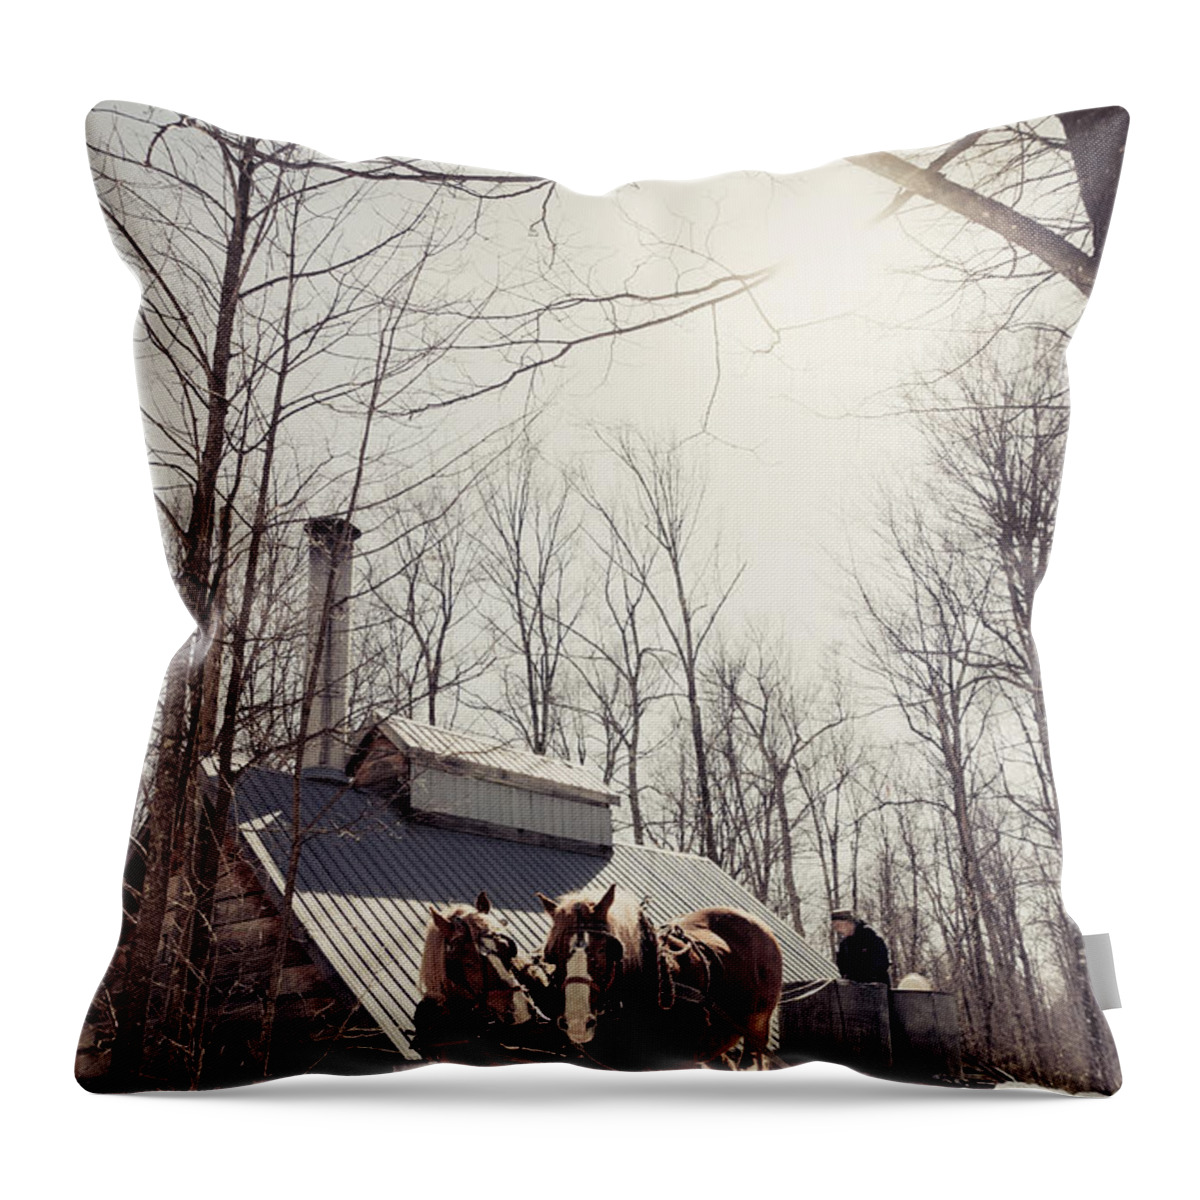 Maple Syrup Throw Pillow featuring the photograph Sap Collection by Cheryl Baxter